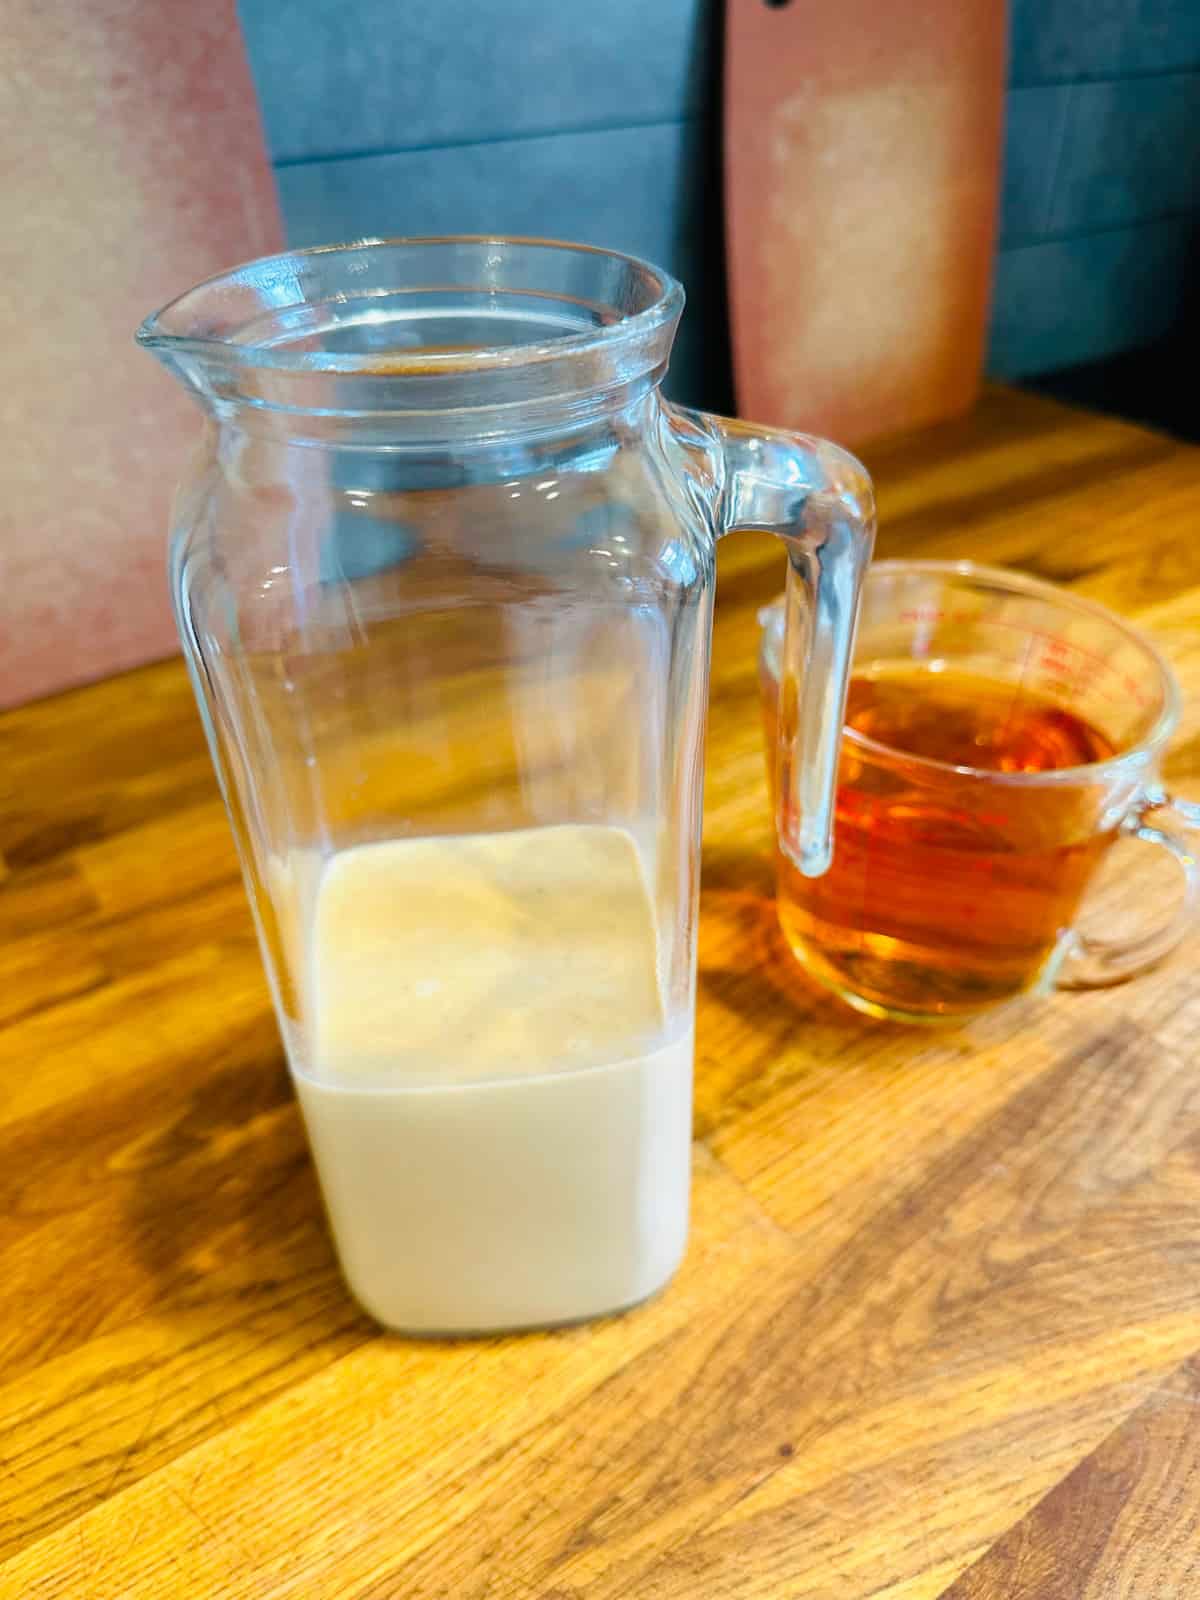 Tall glass pitcher filled half way up with pale creamy liquid next to a glass measuring cup filled with golden brown whiskey.